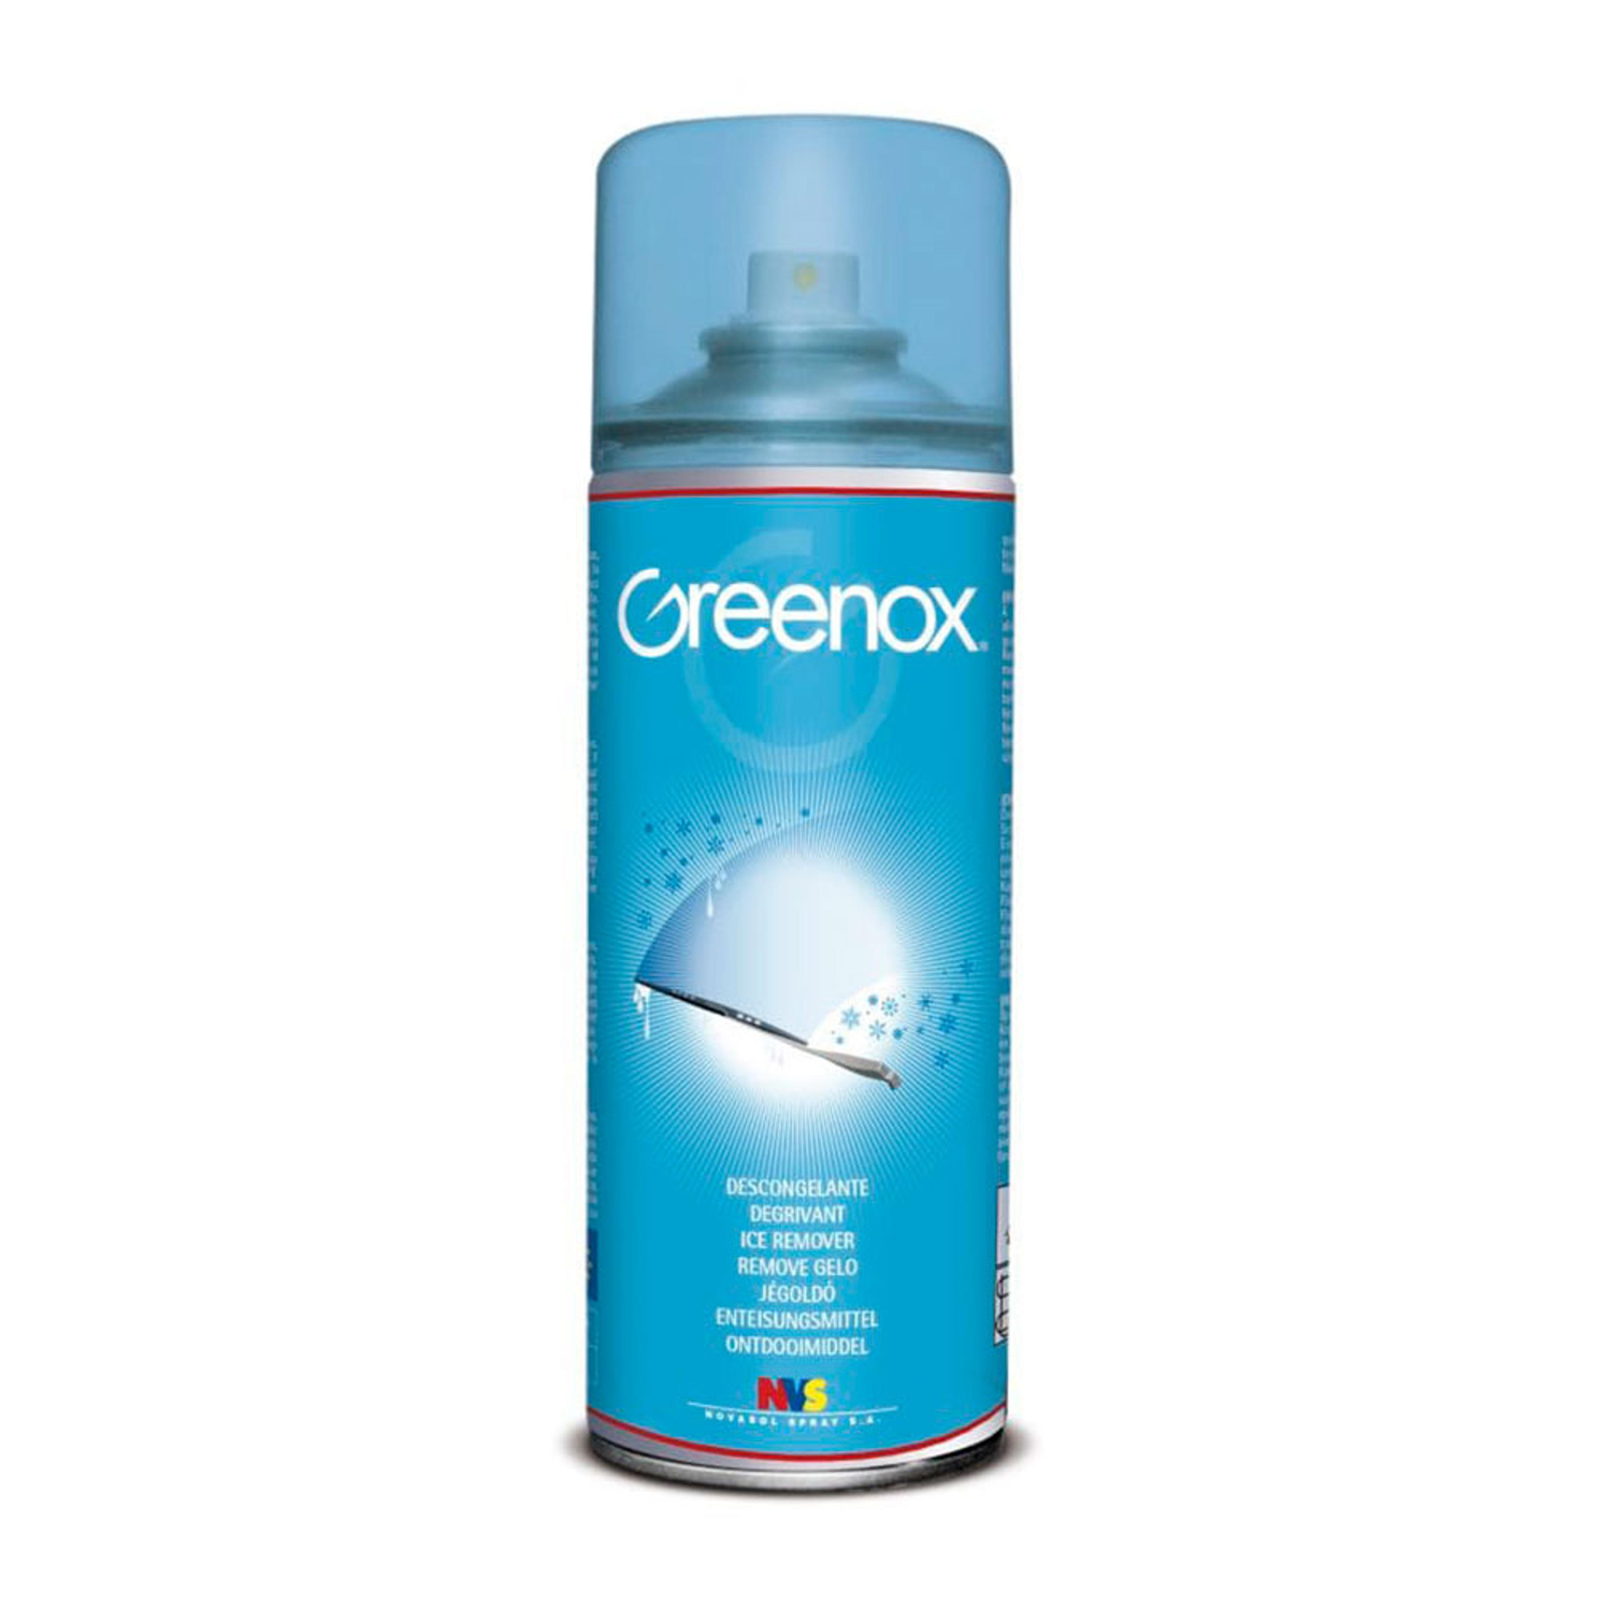 Greenox windshield defroster in 520cc spray format - Cablematic